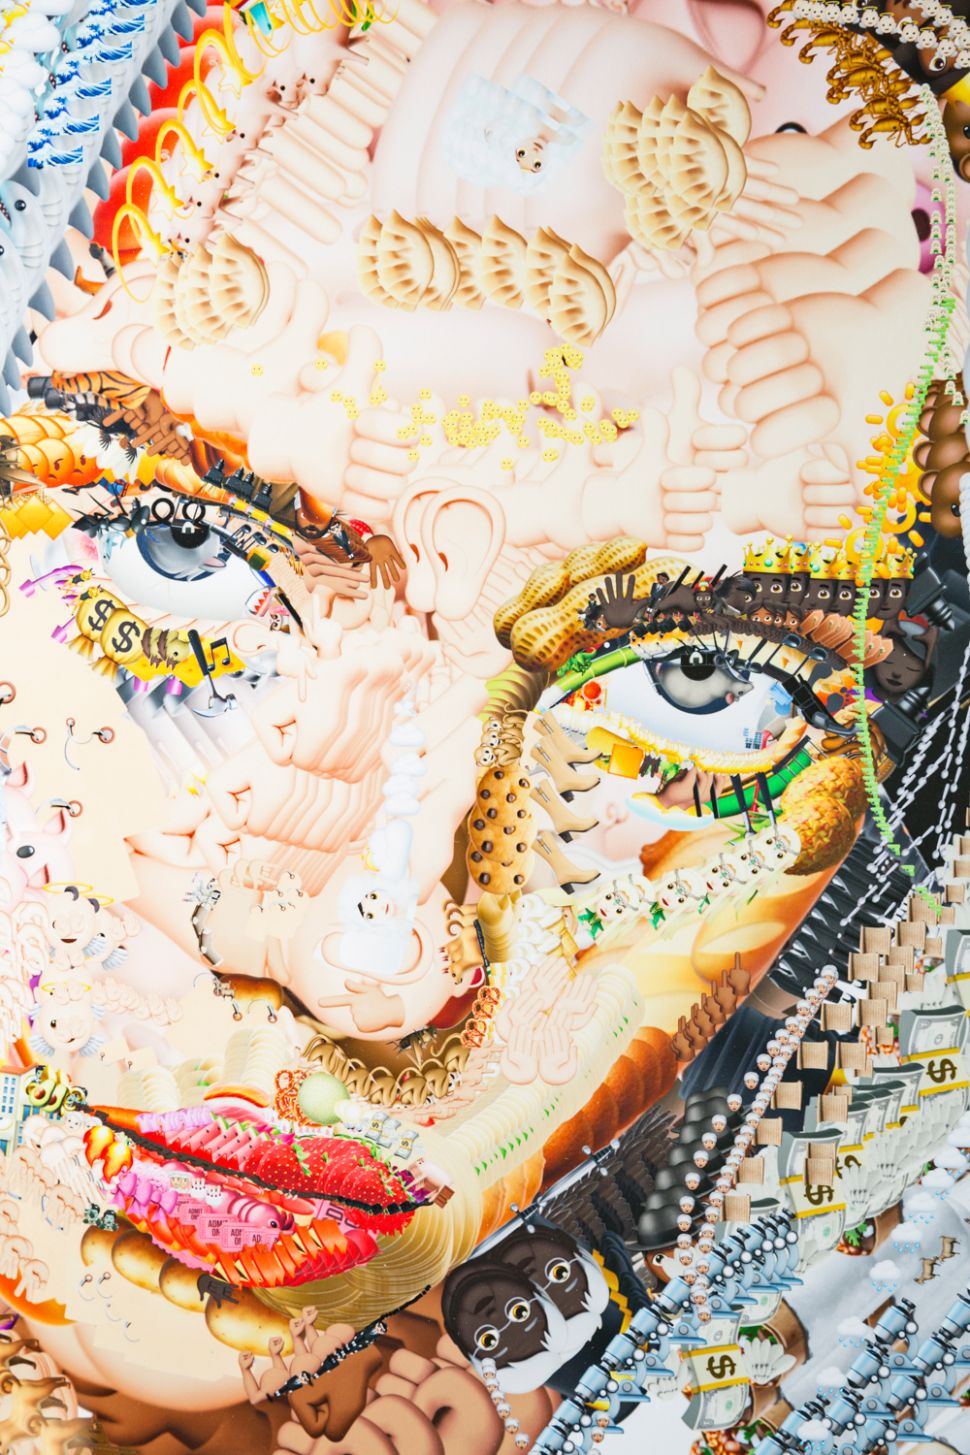 A portrait by Yung Jake made entirely of emoji